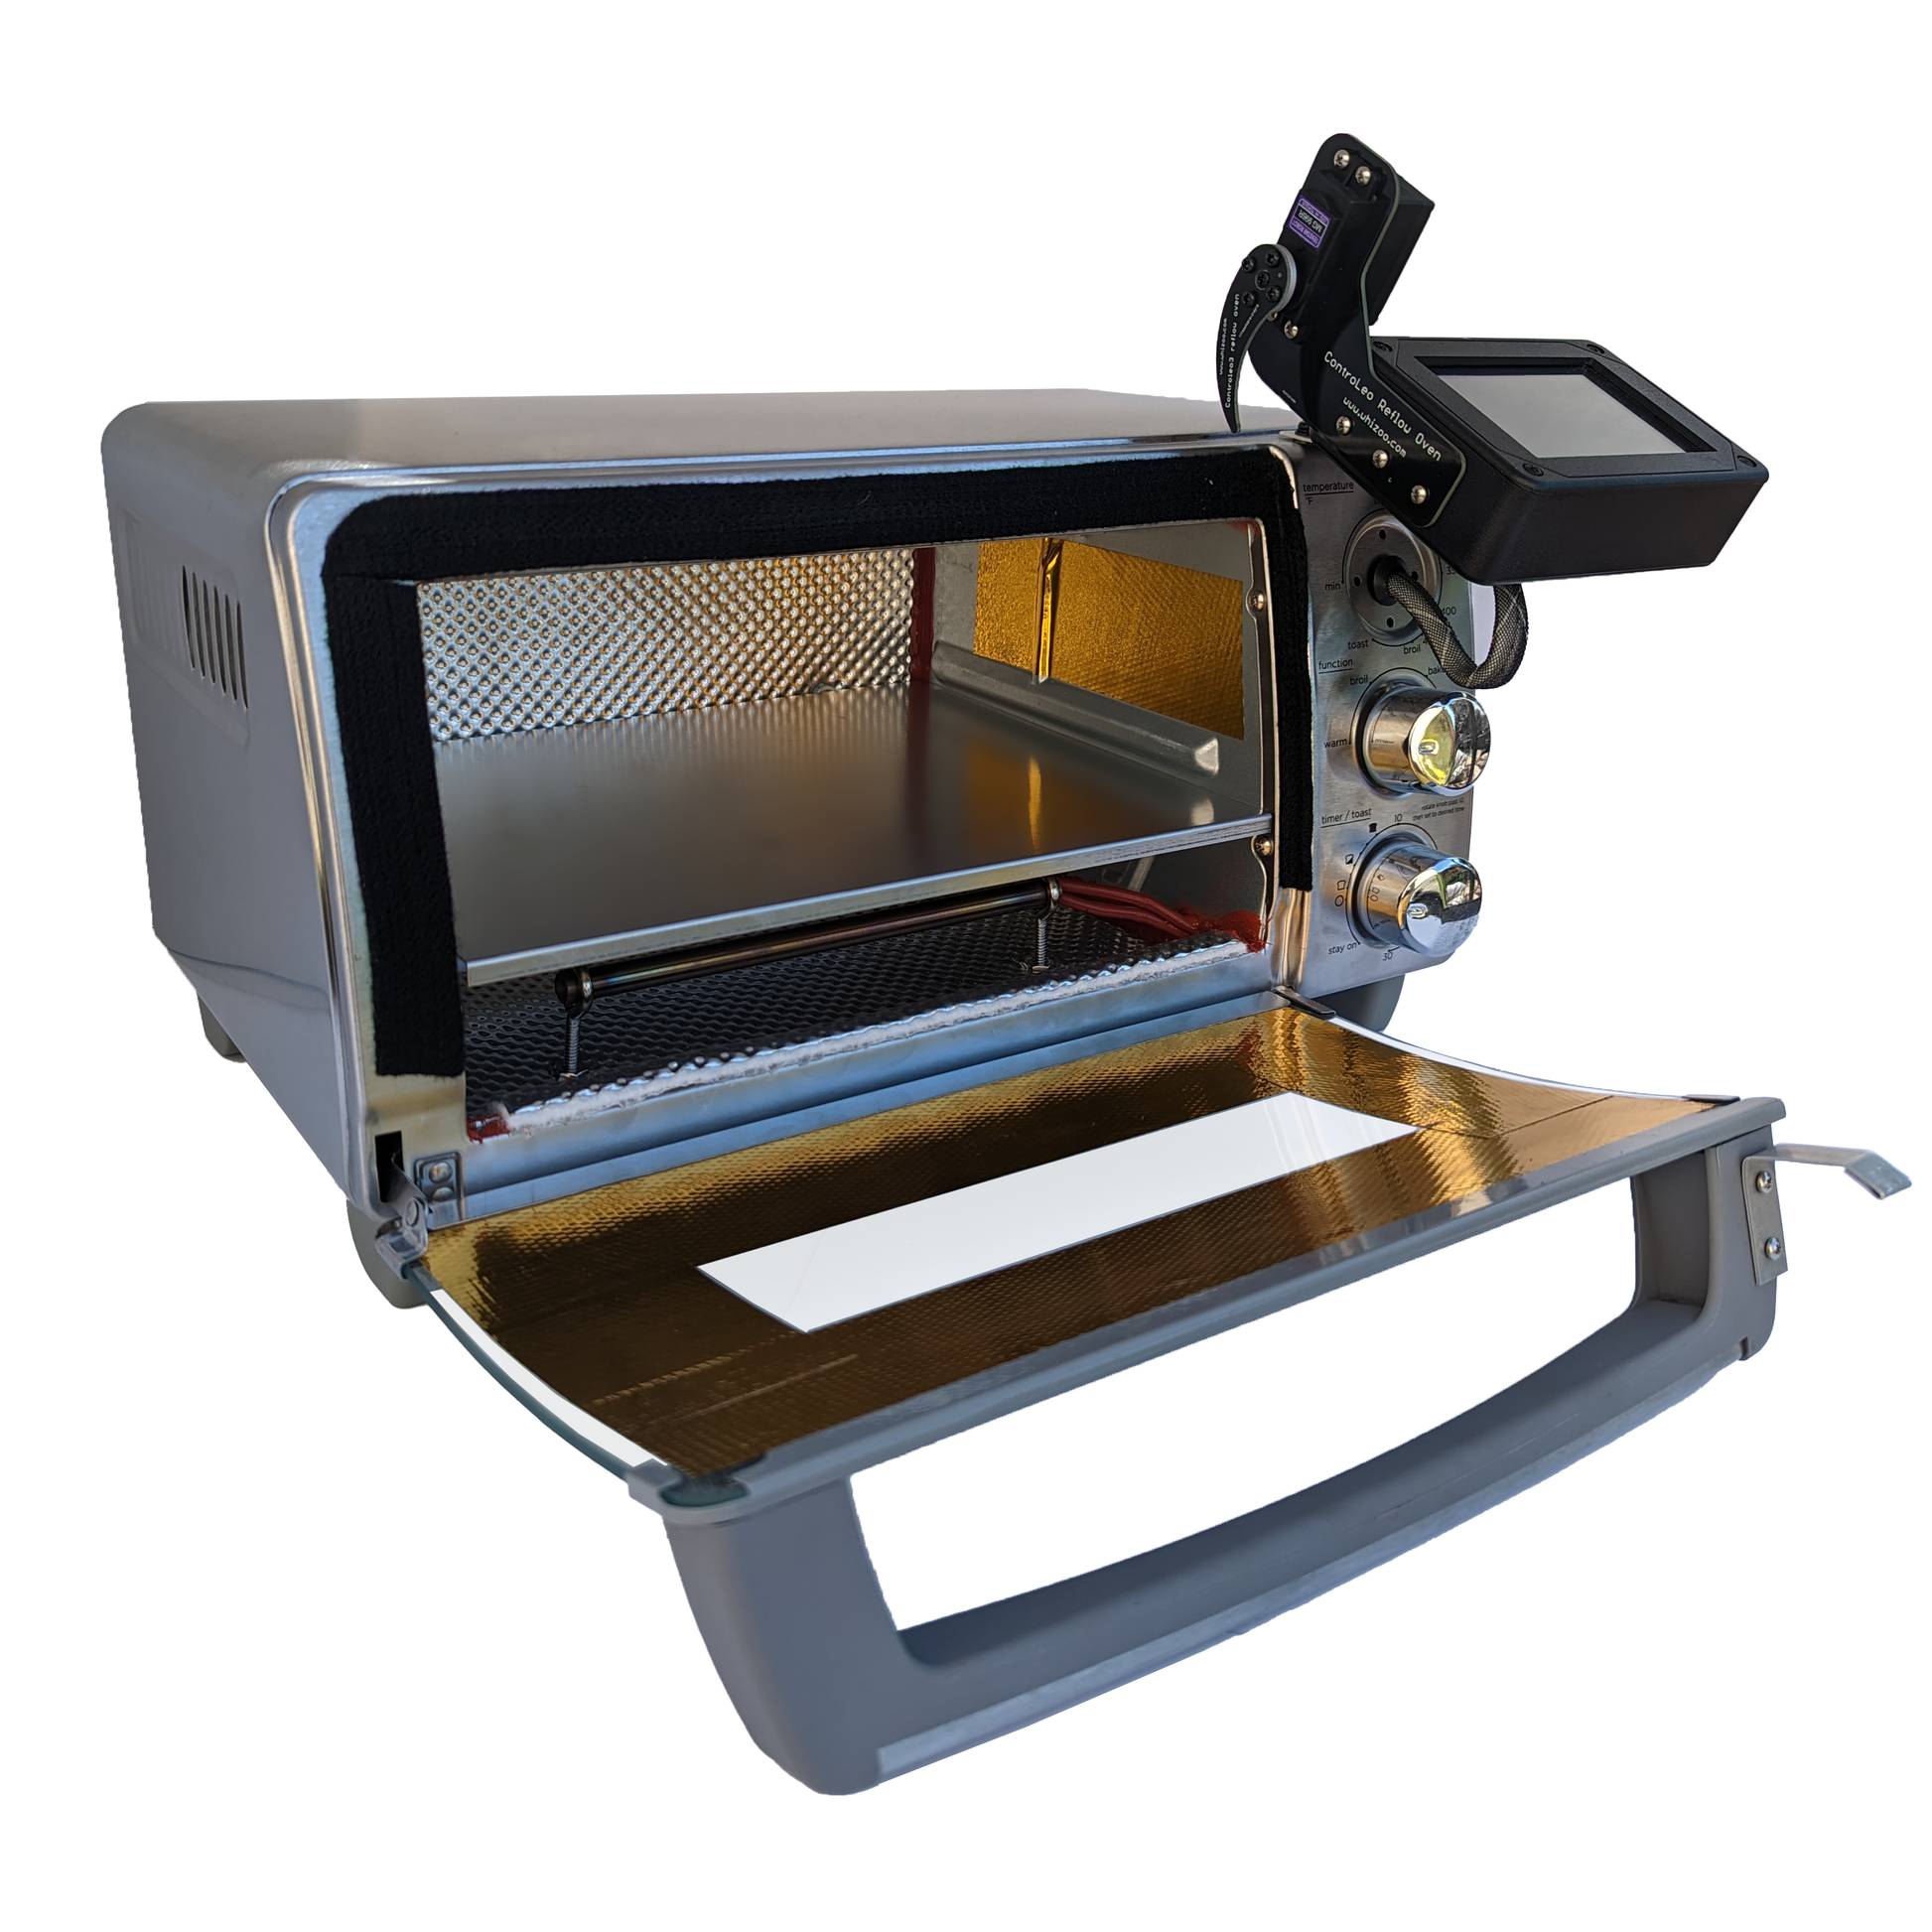 WHAT IS A REFLOW OVEN